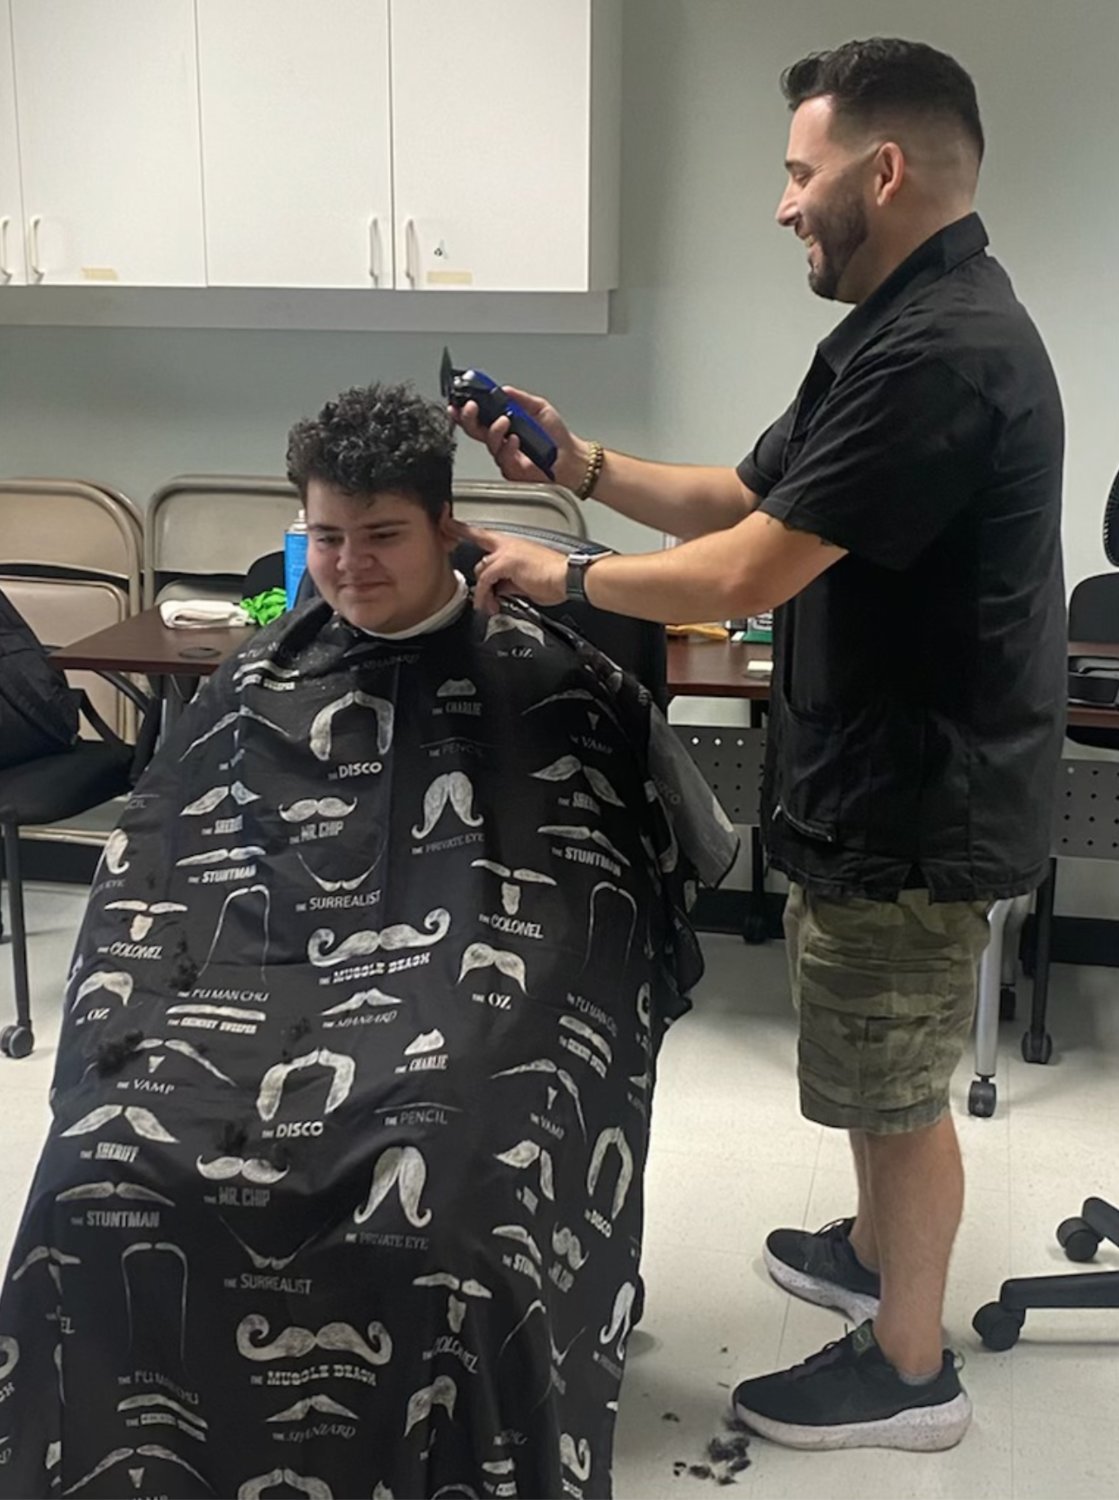 Stylists at The Next Level Barbershop in New Hartford, Critter Maldonado, Niki Marie’s Salon, Olyvia Manella and Style on Main, Isabel Casler, all donated their time and services to youths on Monday at the RIYS office in Utica.